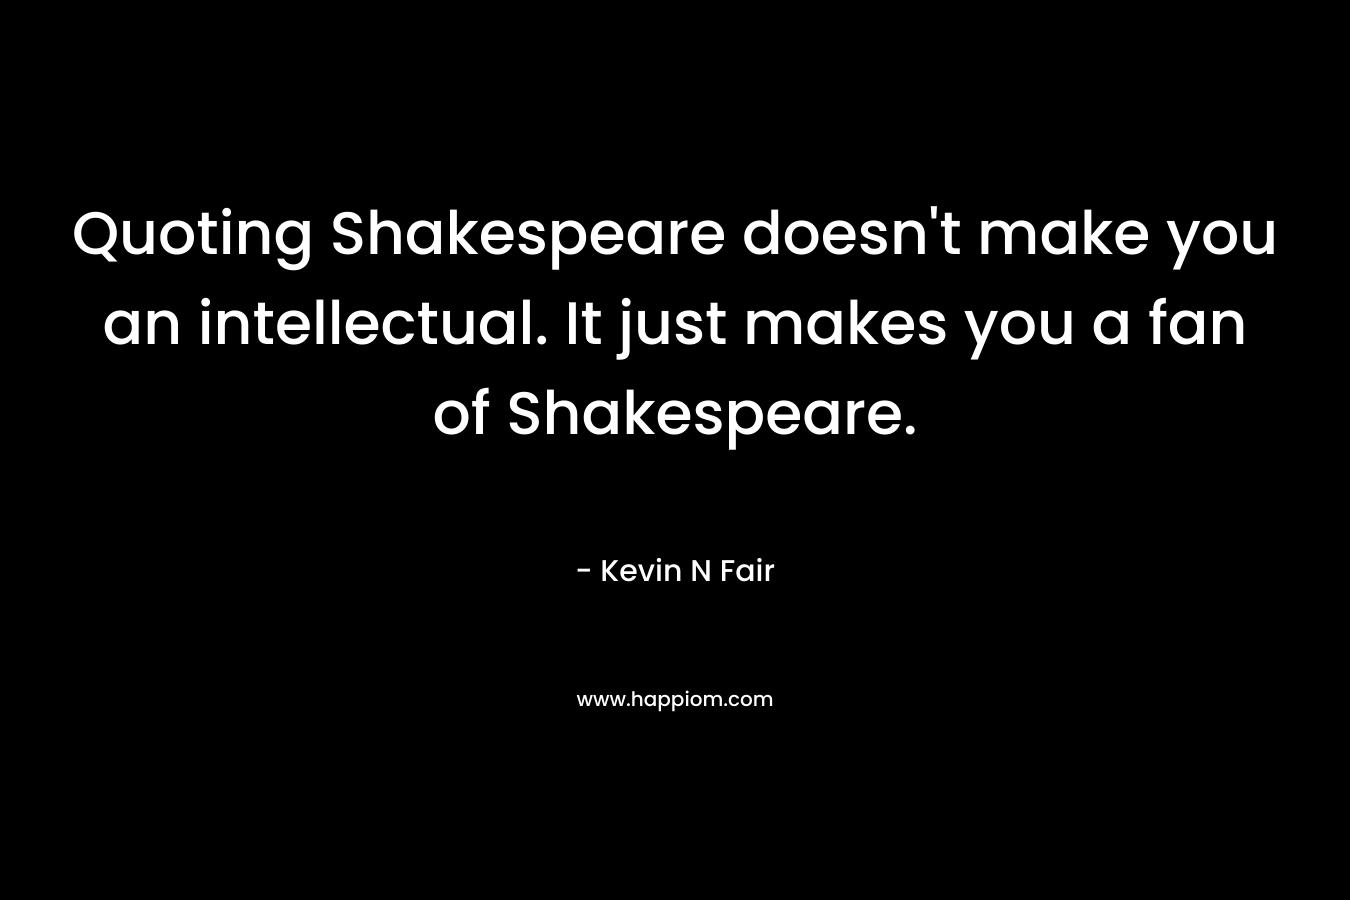 Quoting Shakespeare doesn't make you an intellectual. It just makes you a fan of Shakespeare.